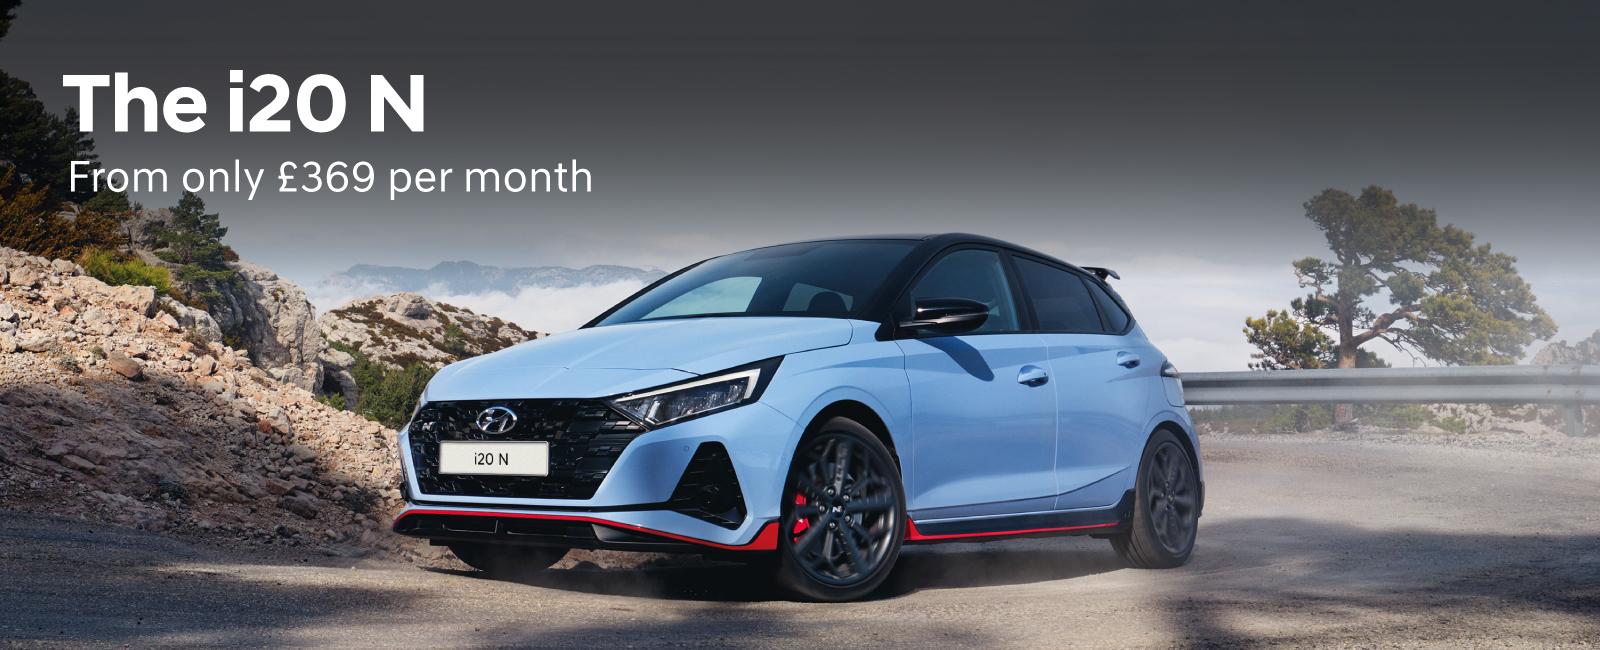 The Hyundai i20 N from only £369 per month